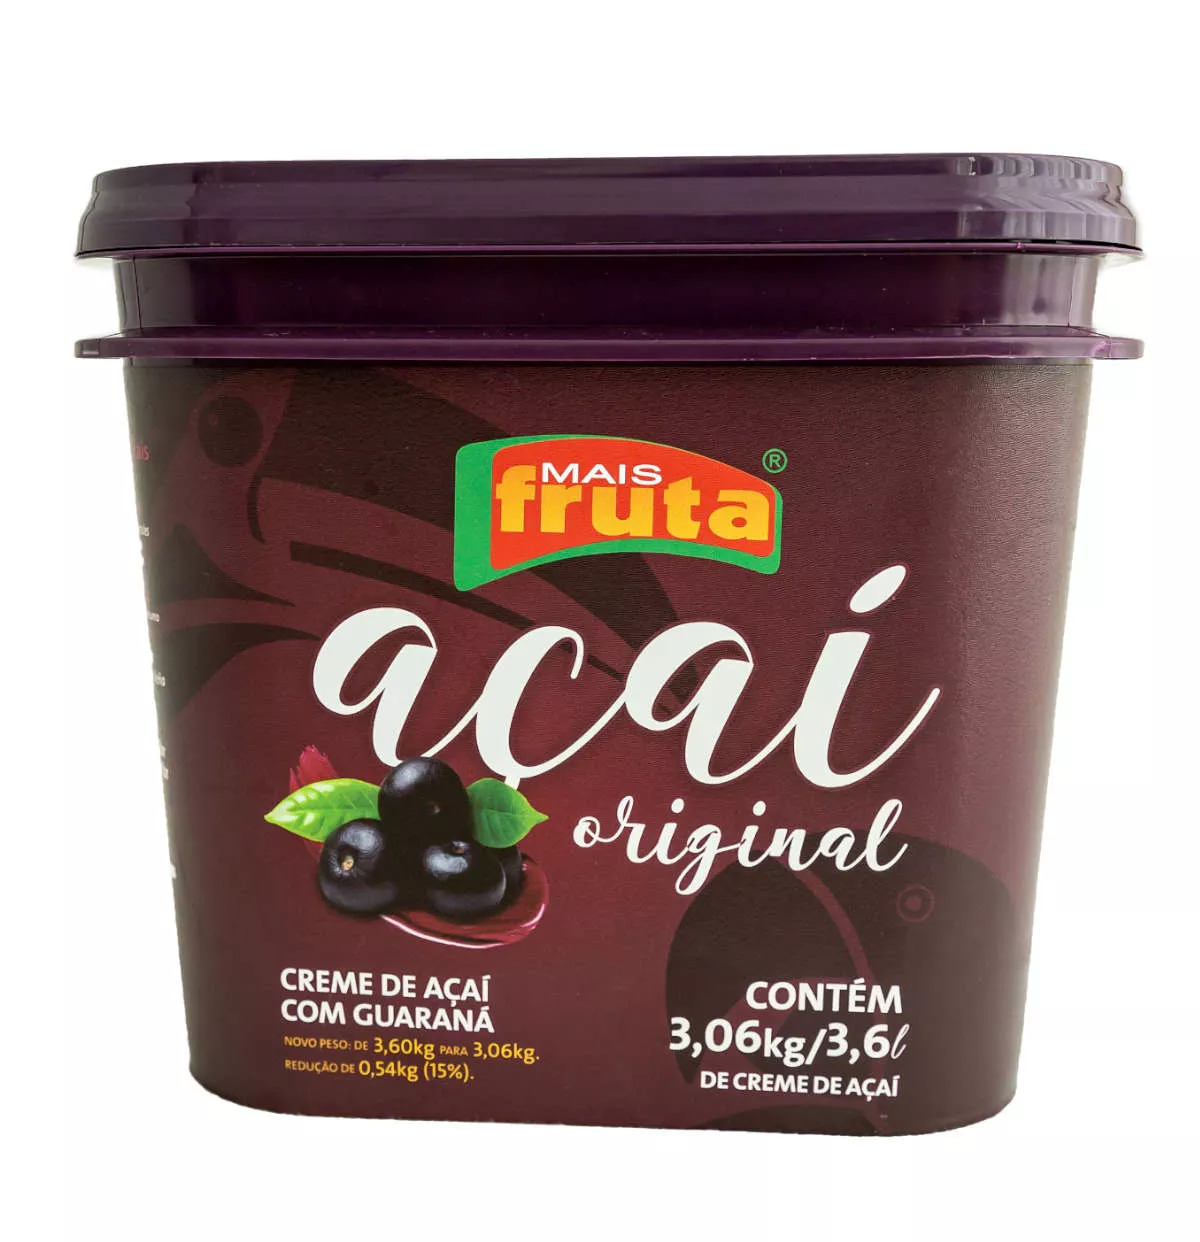 We have various sized tubs of pure acai available, depending on the size of your freezer